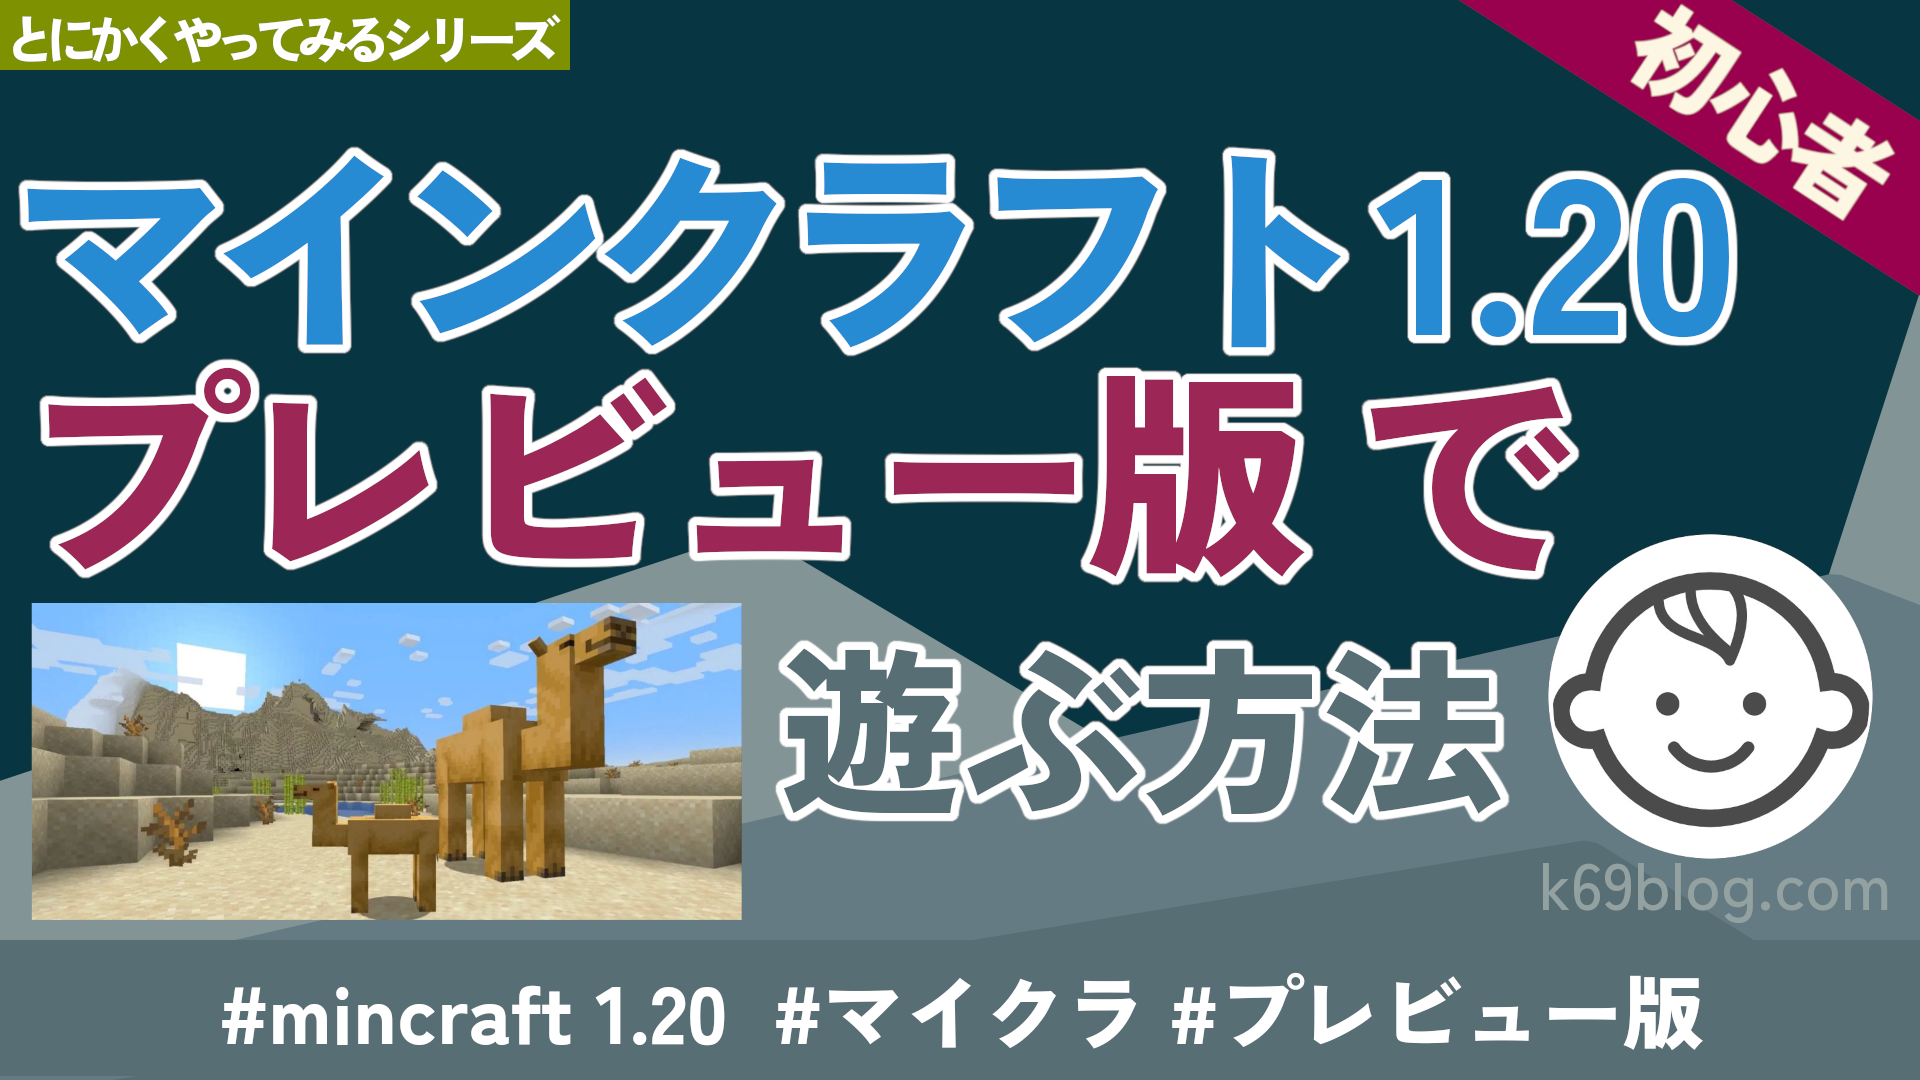 Cover Image for マインクラフト 1.20 プレビュー版 で遊ぶ方法